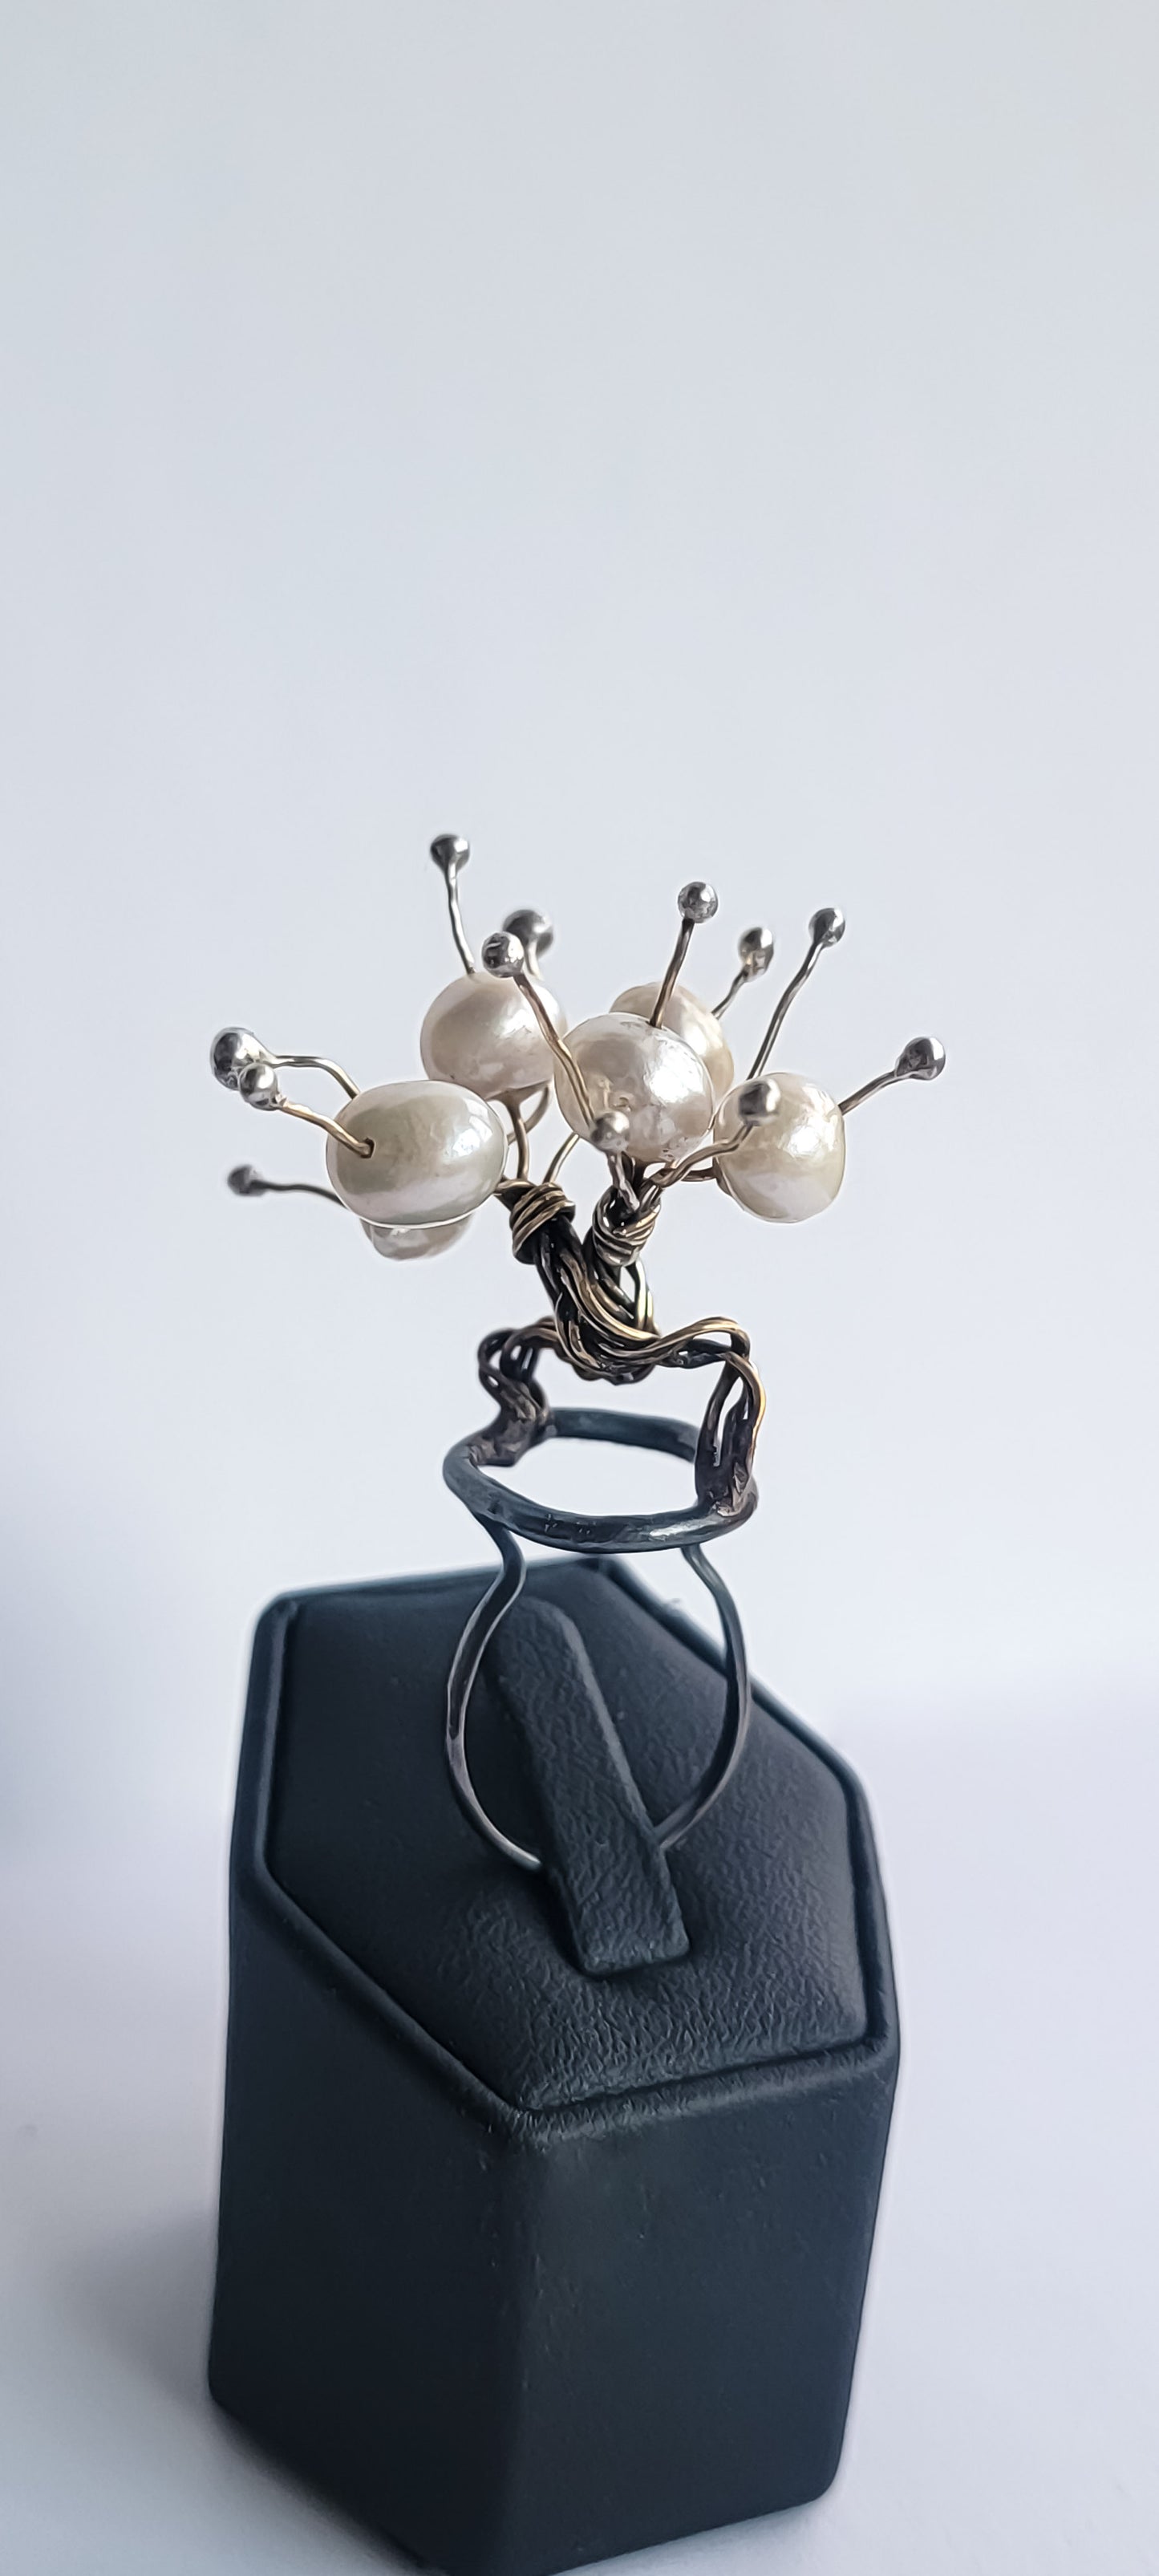 Jeweler's brass and sterling silver statement ring. Two braided trees are intertwined in a hugging position with white freshwater pearls on the top and sterling balls on the ends of each wire.